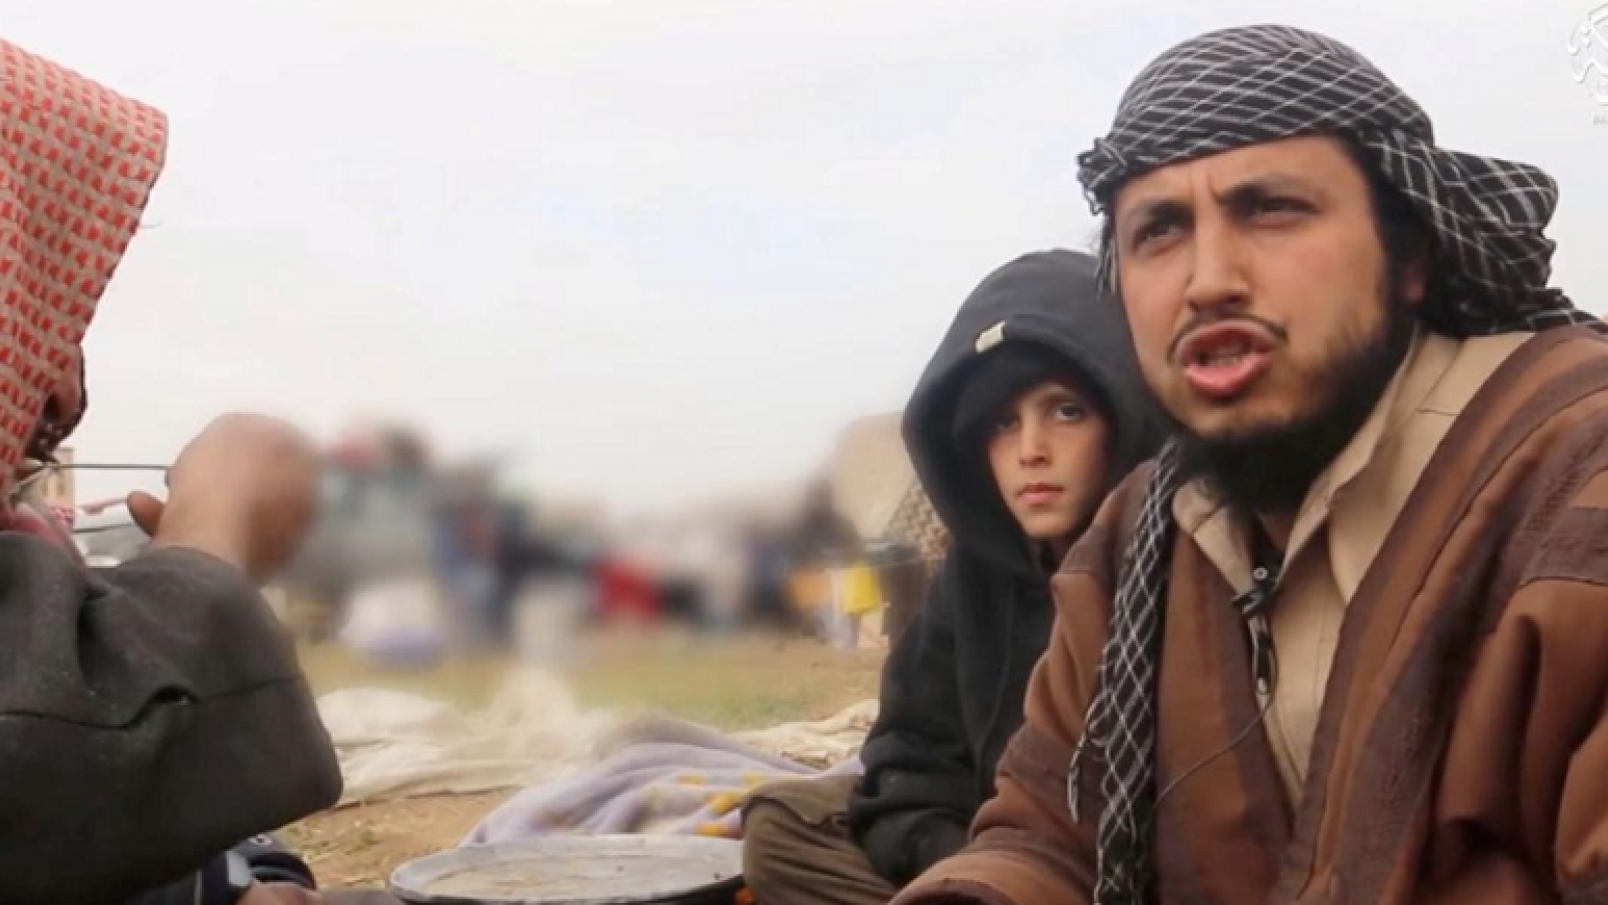 Islamic State Spokesman Abu Abd al-Azeem: “What’s Our Crime? We Just Wanted To Apply Sharia”